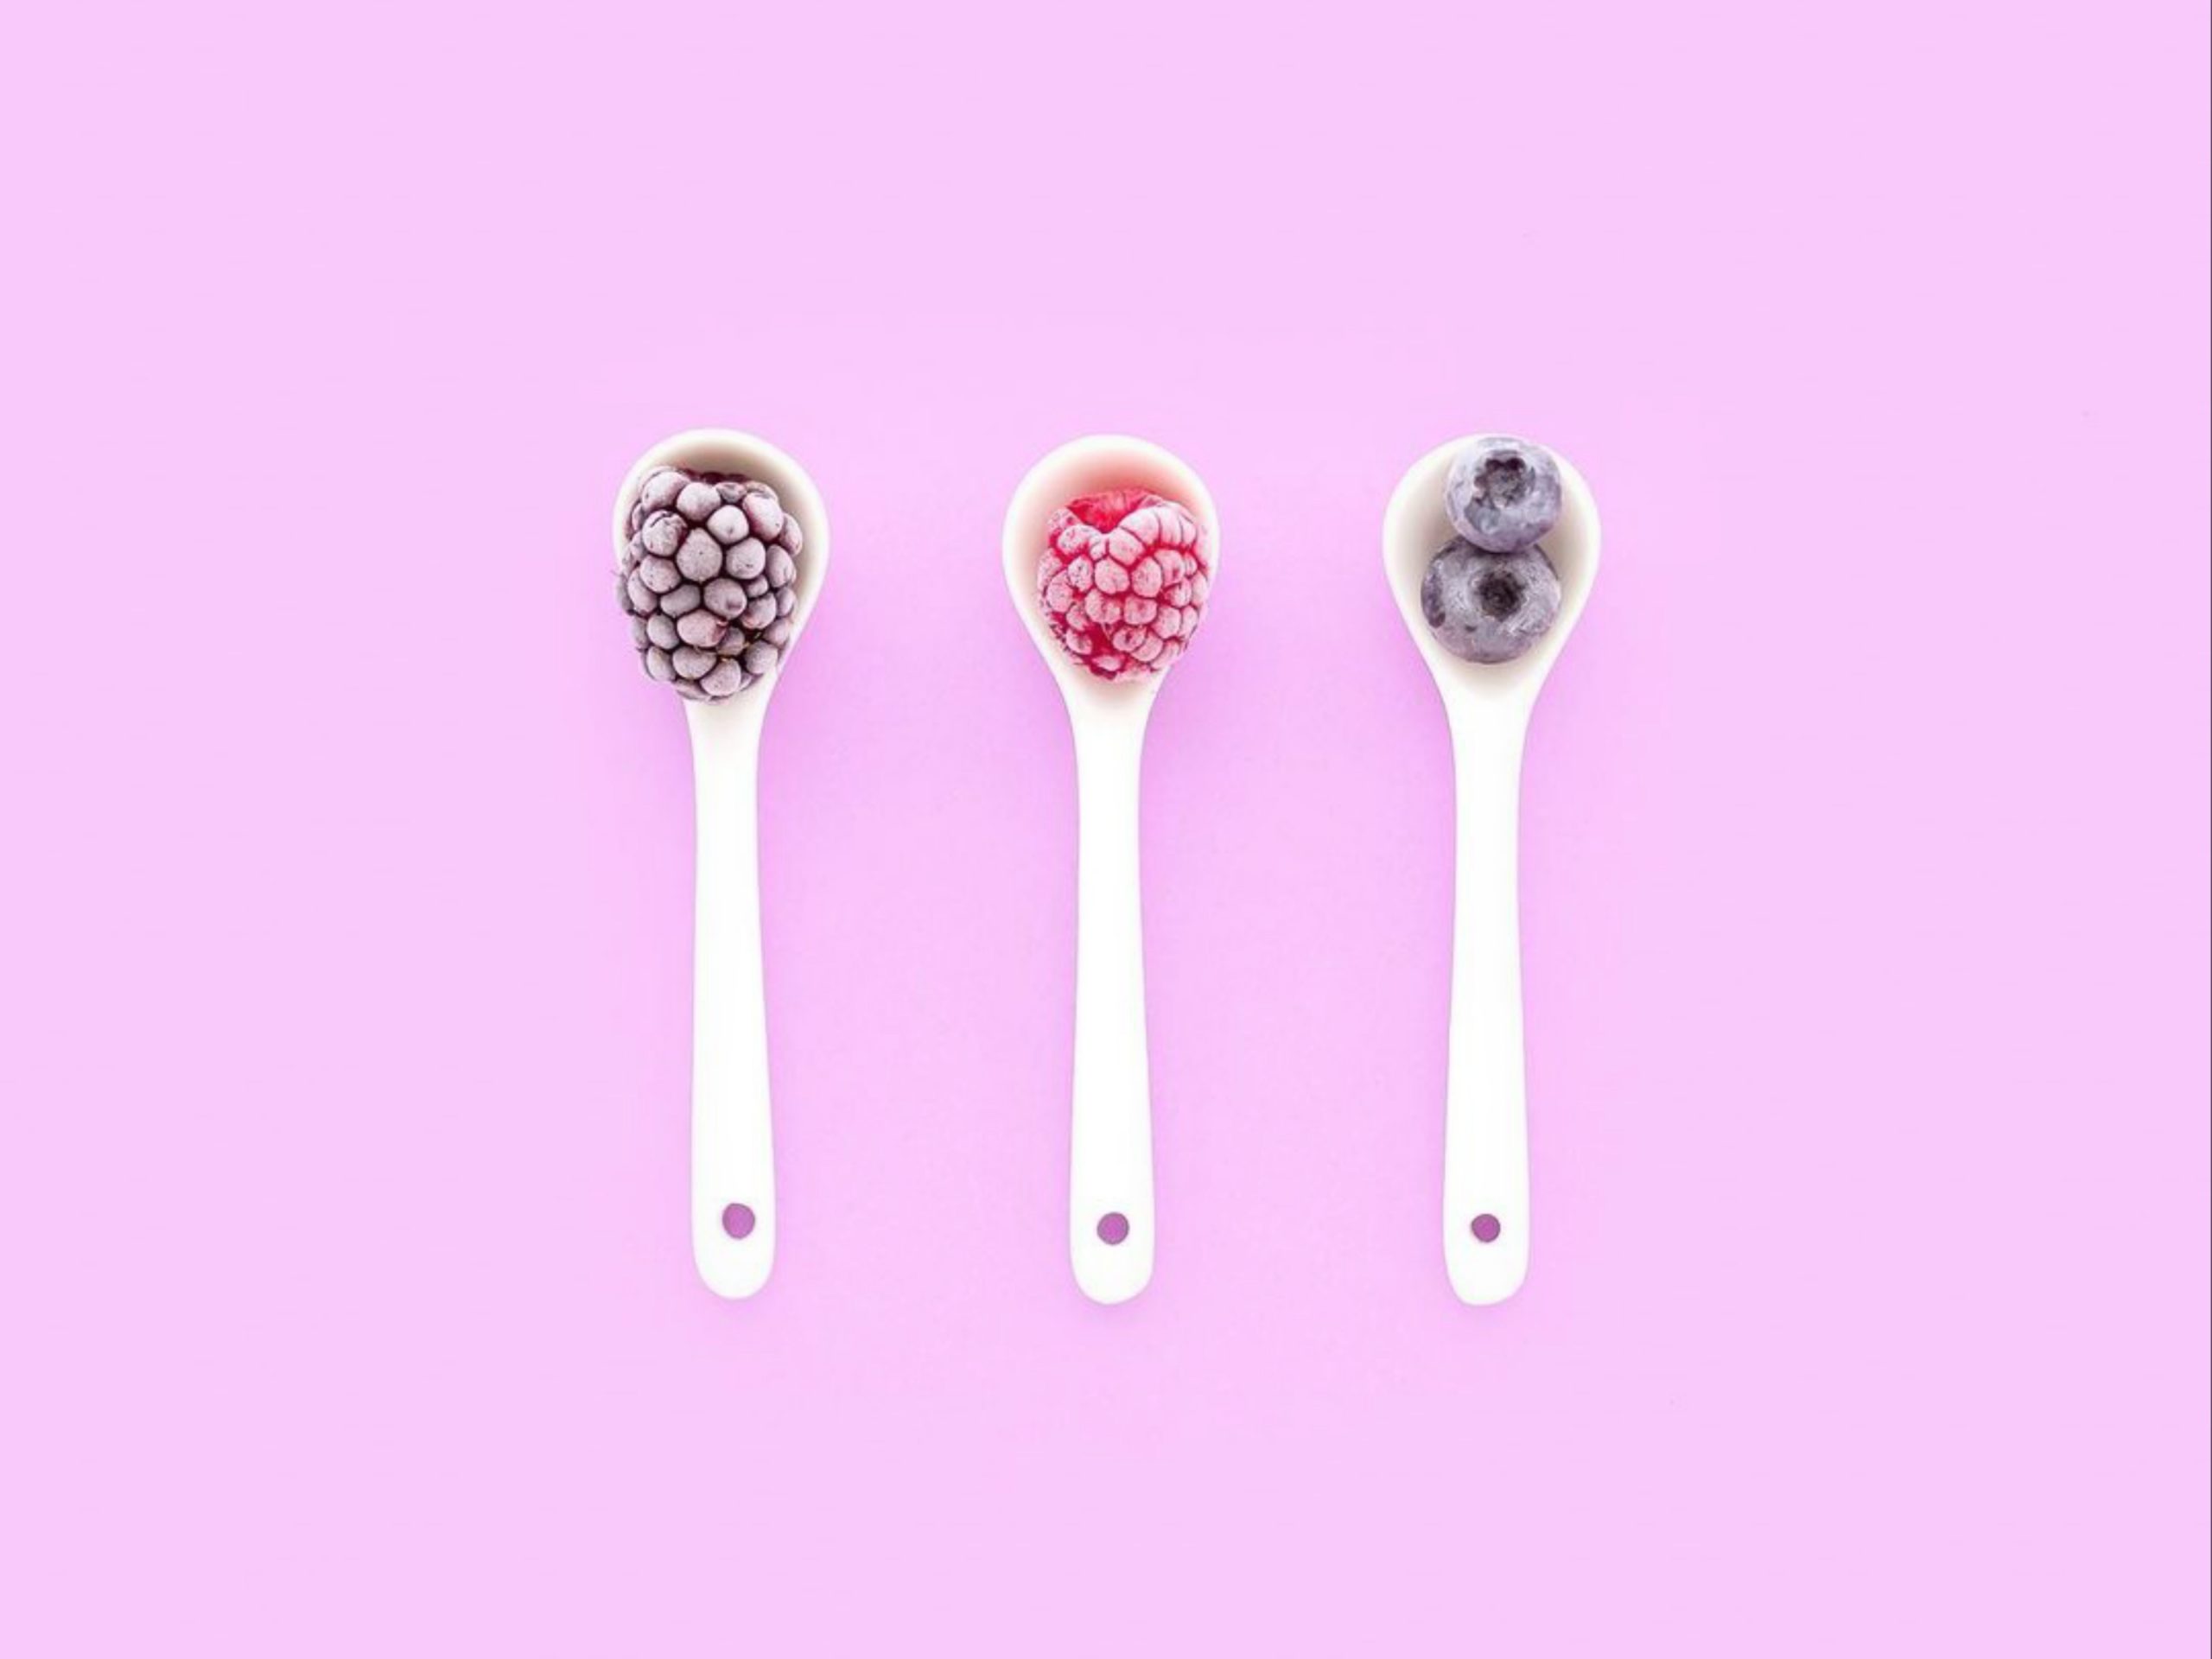 Spoons filled with berries